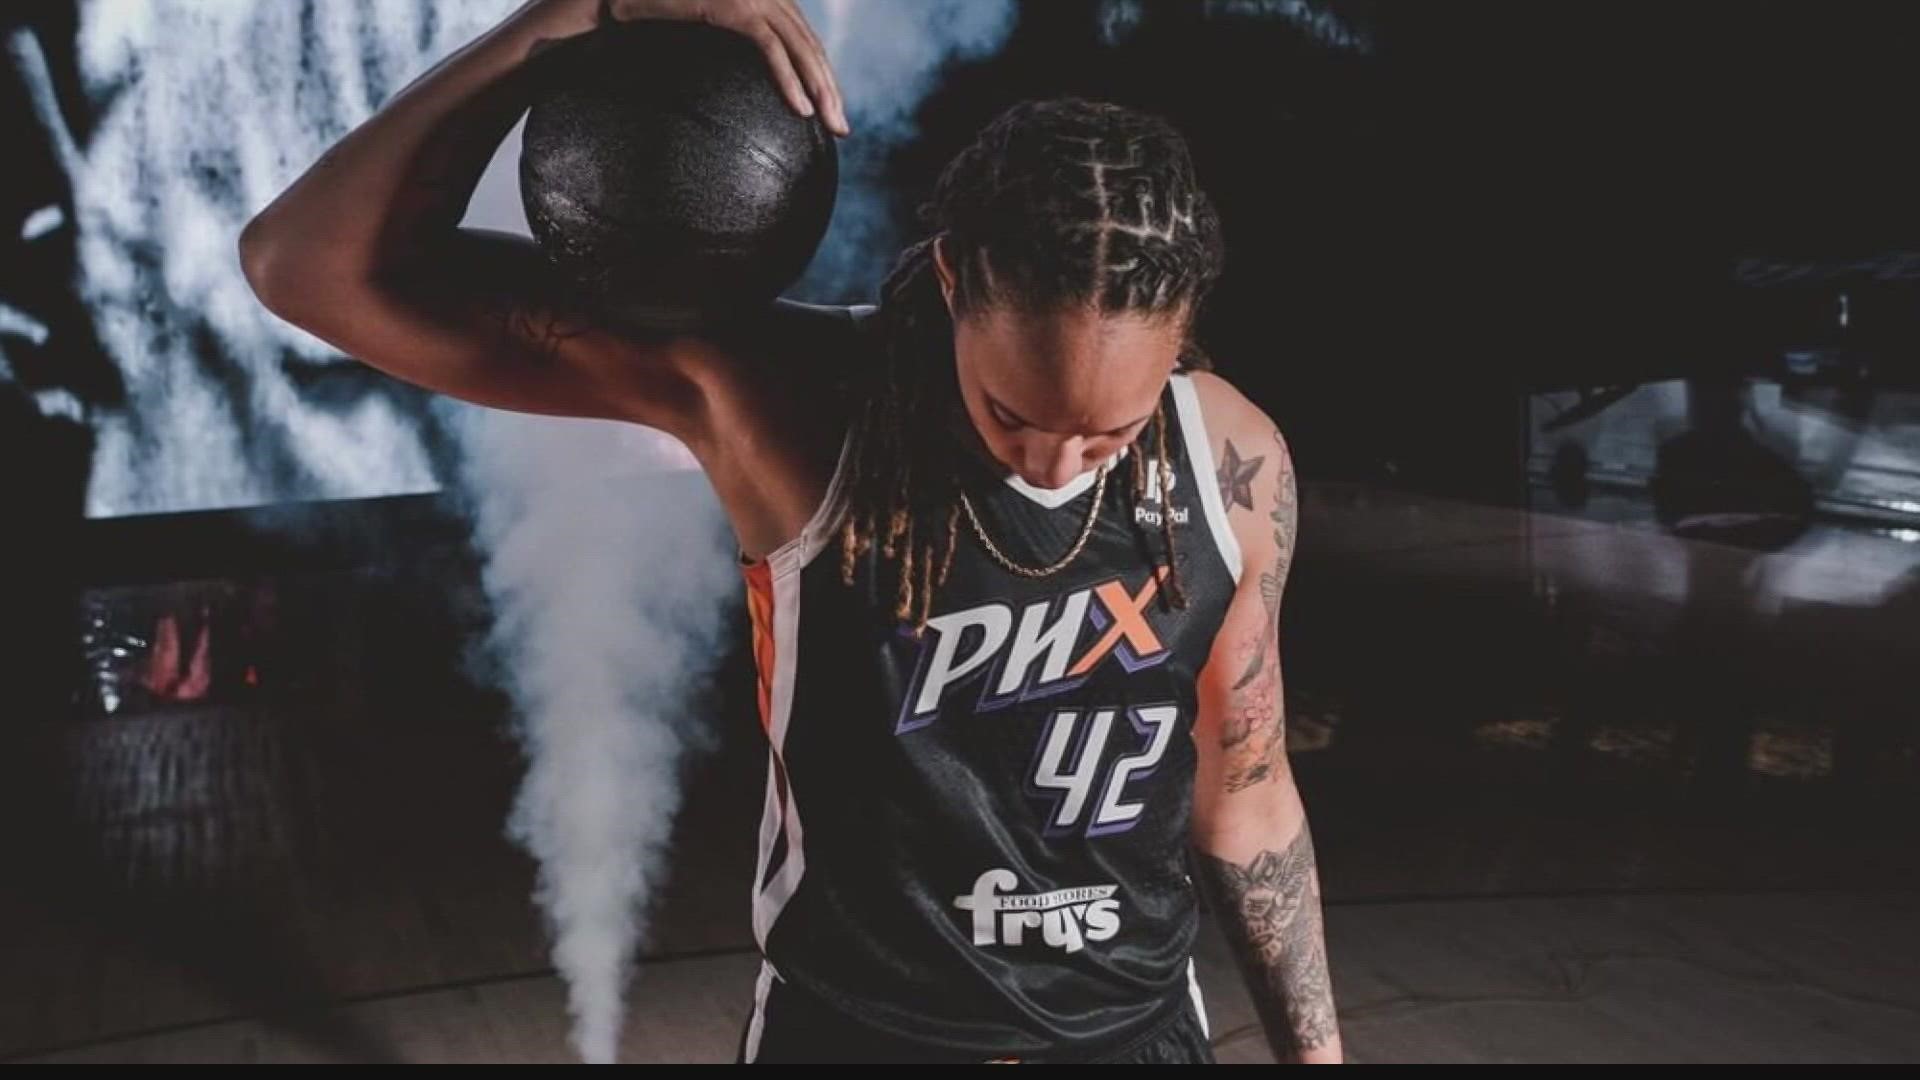 Griner was detained at an airport in February after Russian authorities said a search of her bag revealed vape cartridges containing traces of cannabis oil.